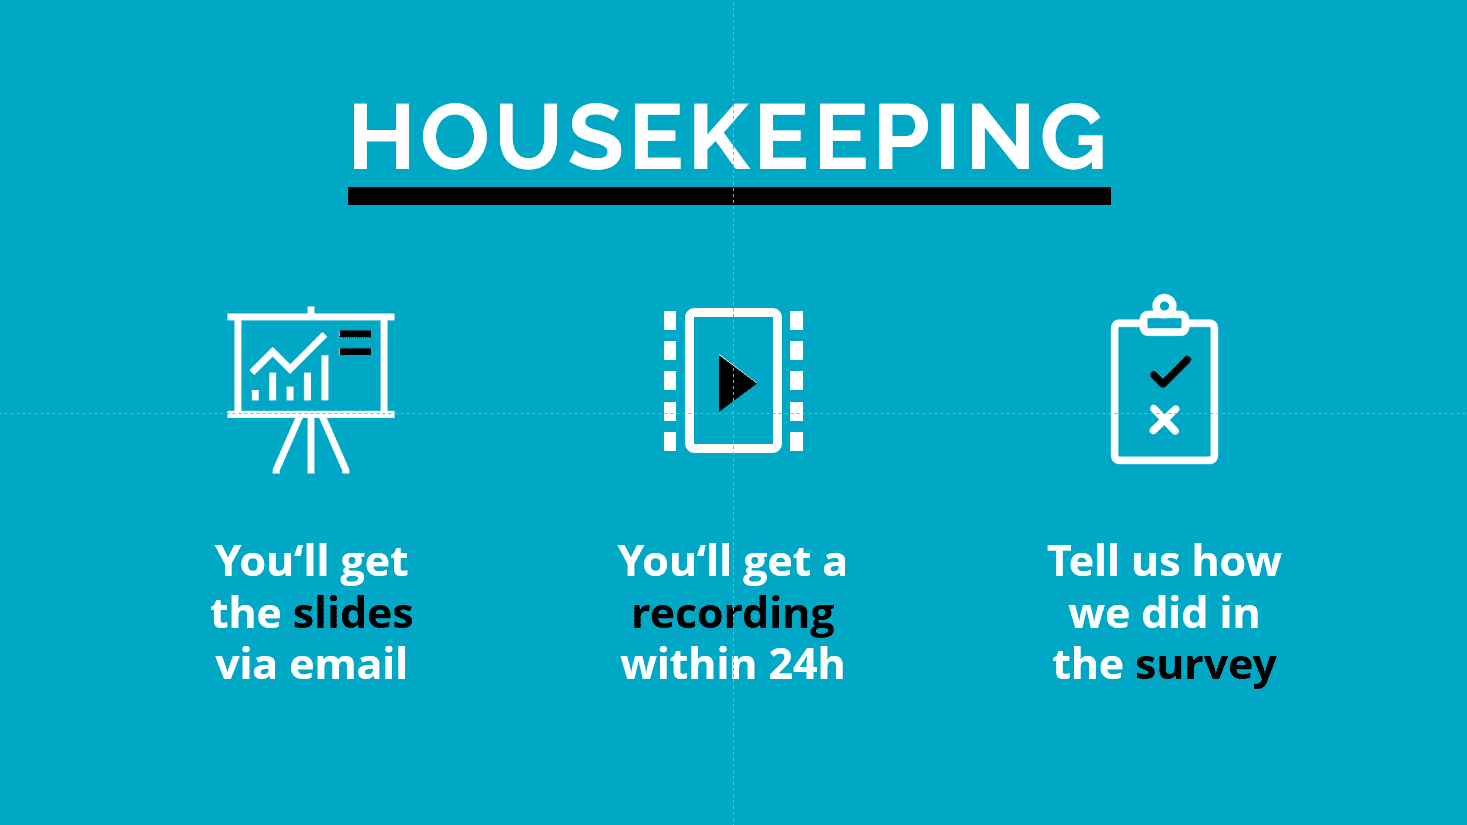 Webinar Housekeeping Slide - yes you'll get the slides and recording